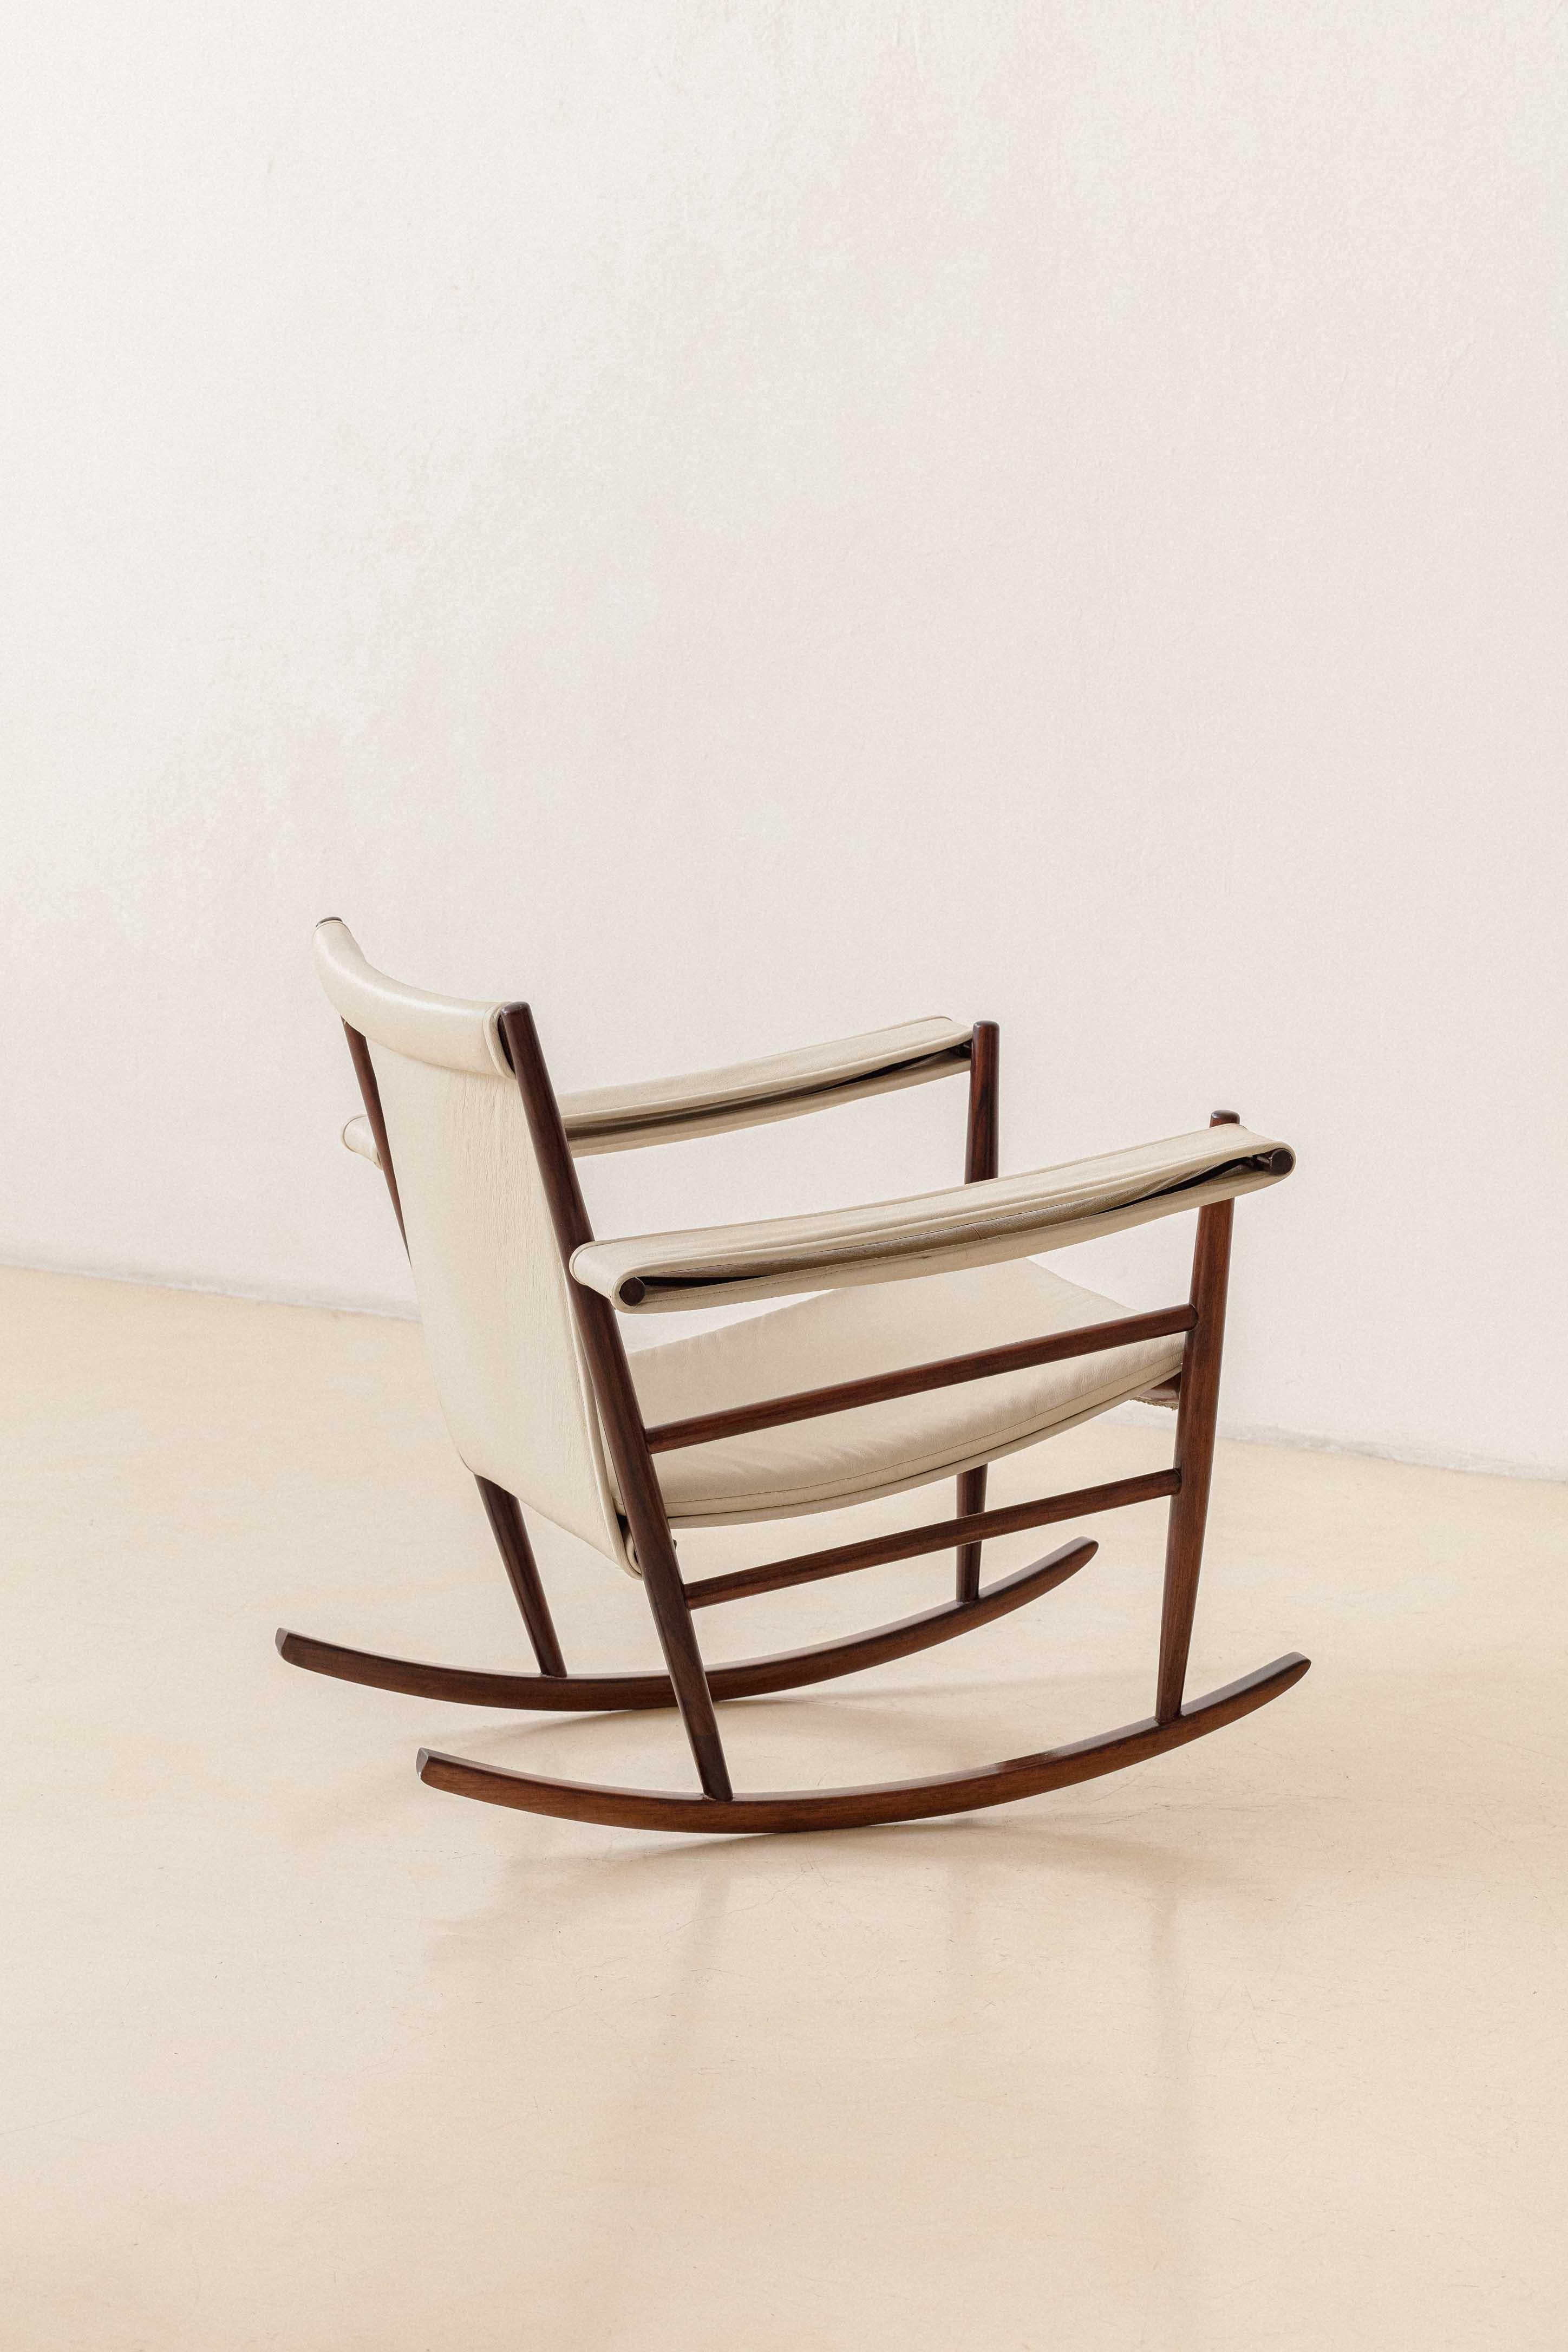 Vintage Rocking Chair by Joaquim Tenreiro, 1947, Brazilian Midcentury Design In Good Condition For Sale In New York, NY